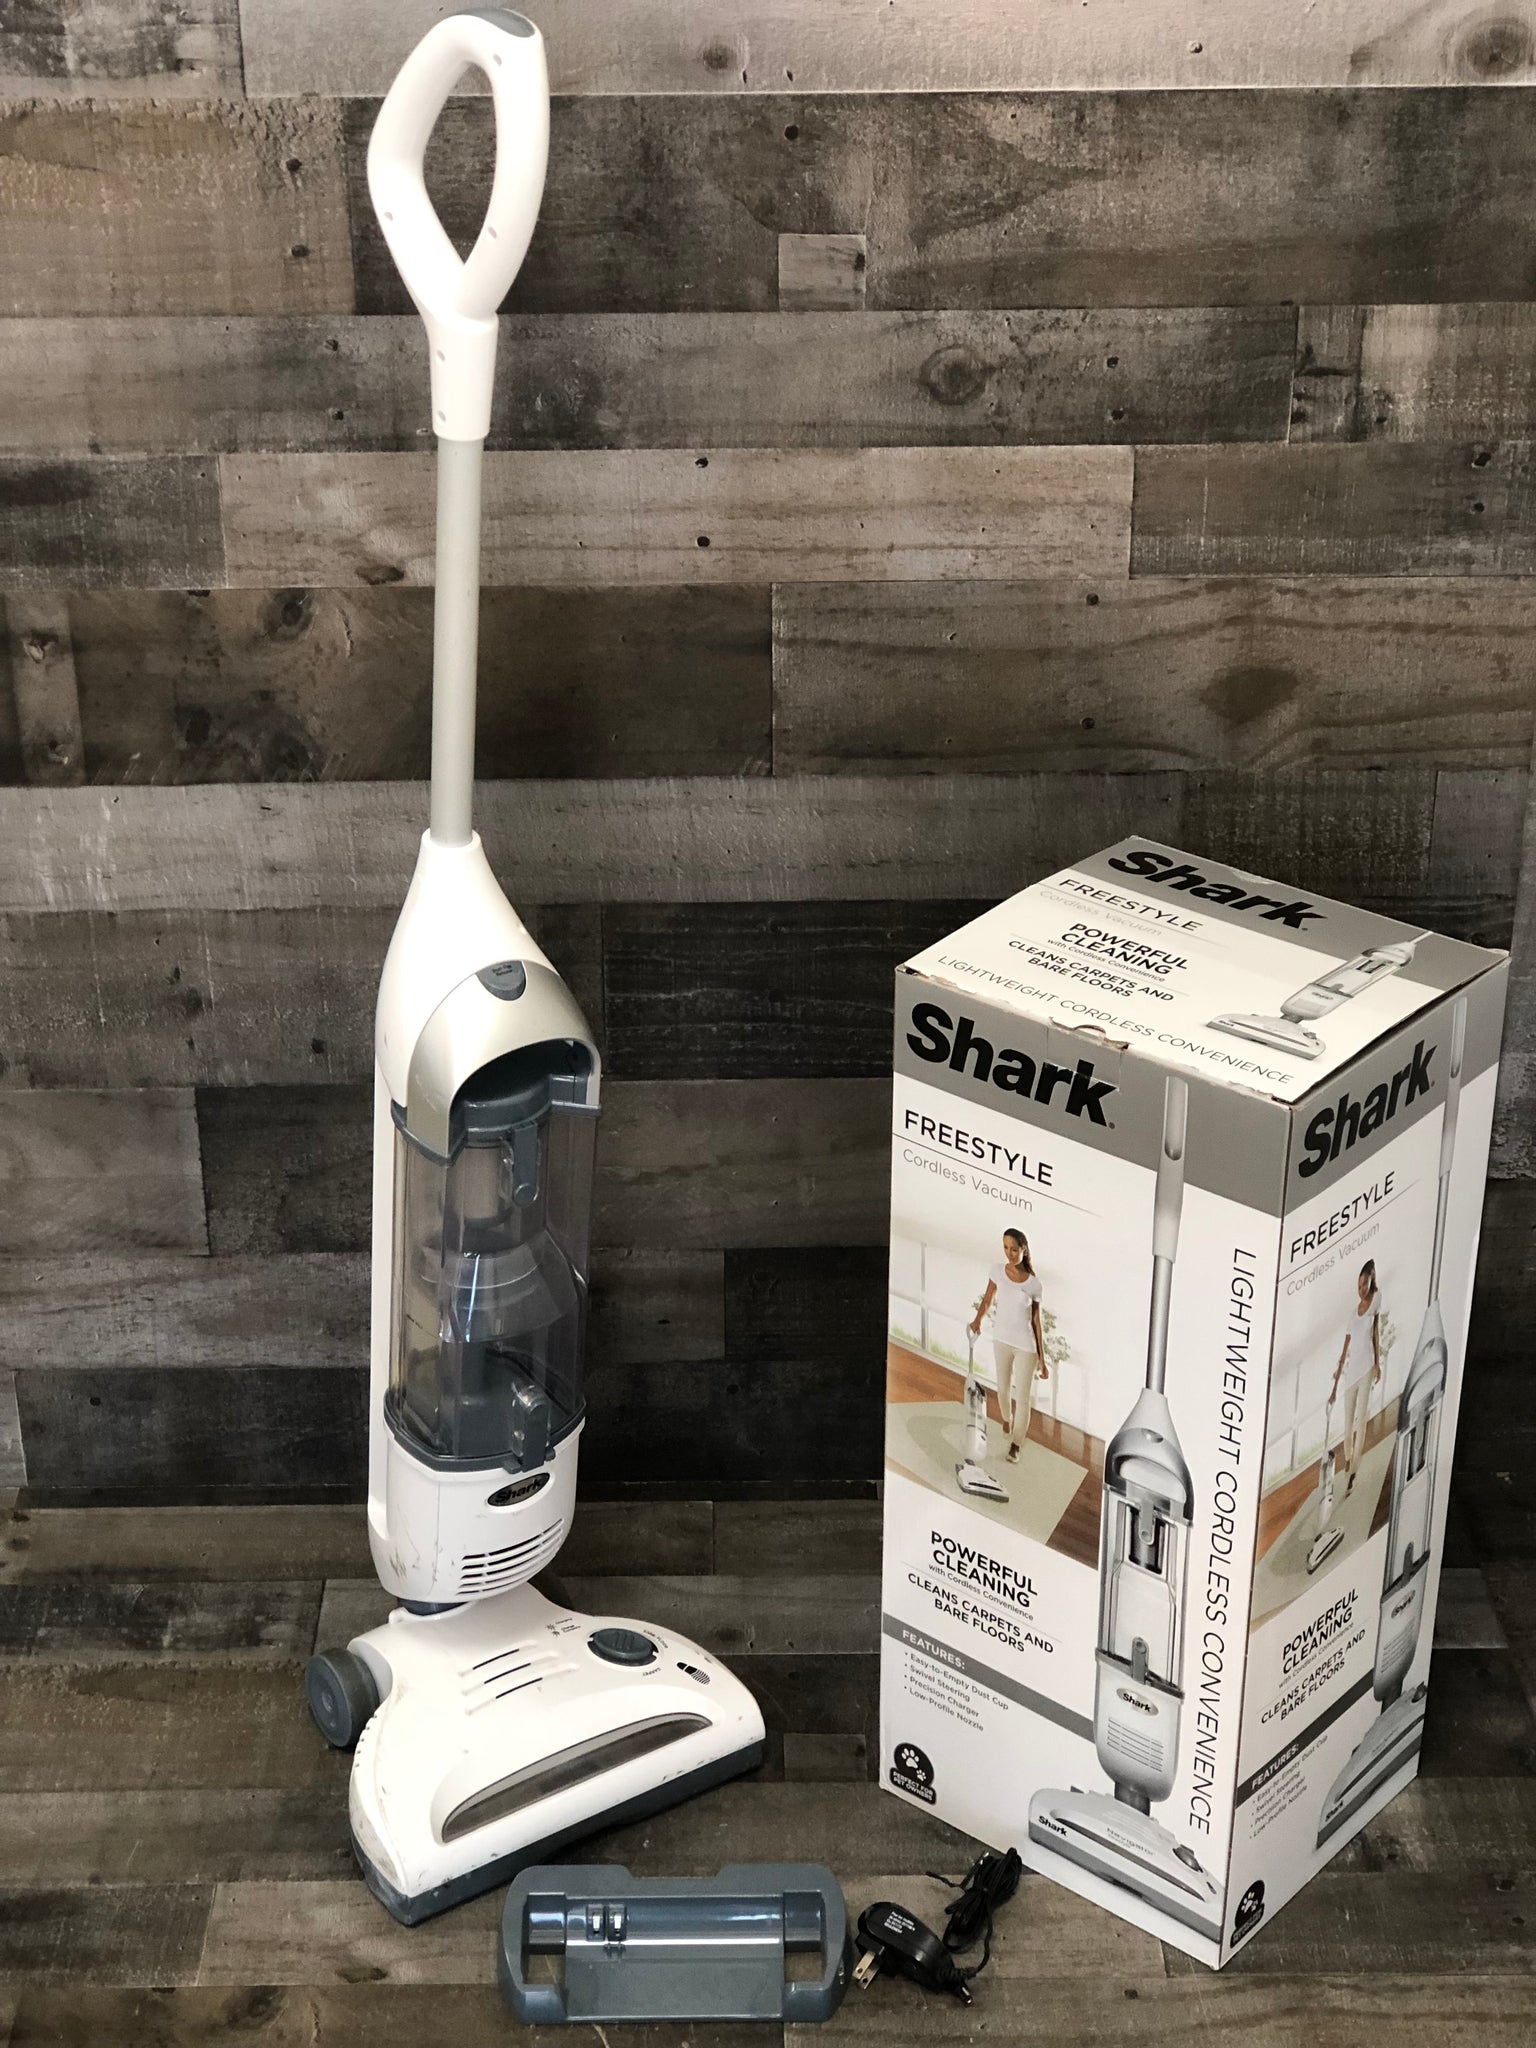 Shark Navigator Freestyle Upright Stick Cordless Bagless Vacuum for Carpet, Hard Floor and Pet with XL Dust Cup and 2-Speed Brush roll (SV1106), White/Grey.